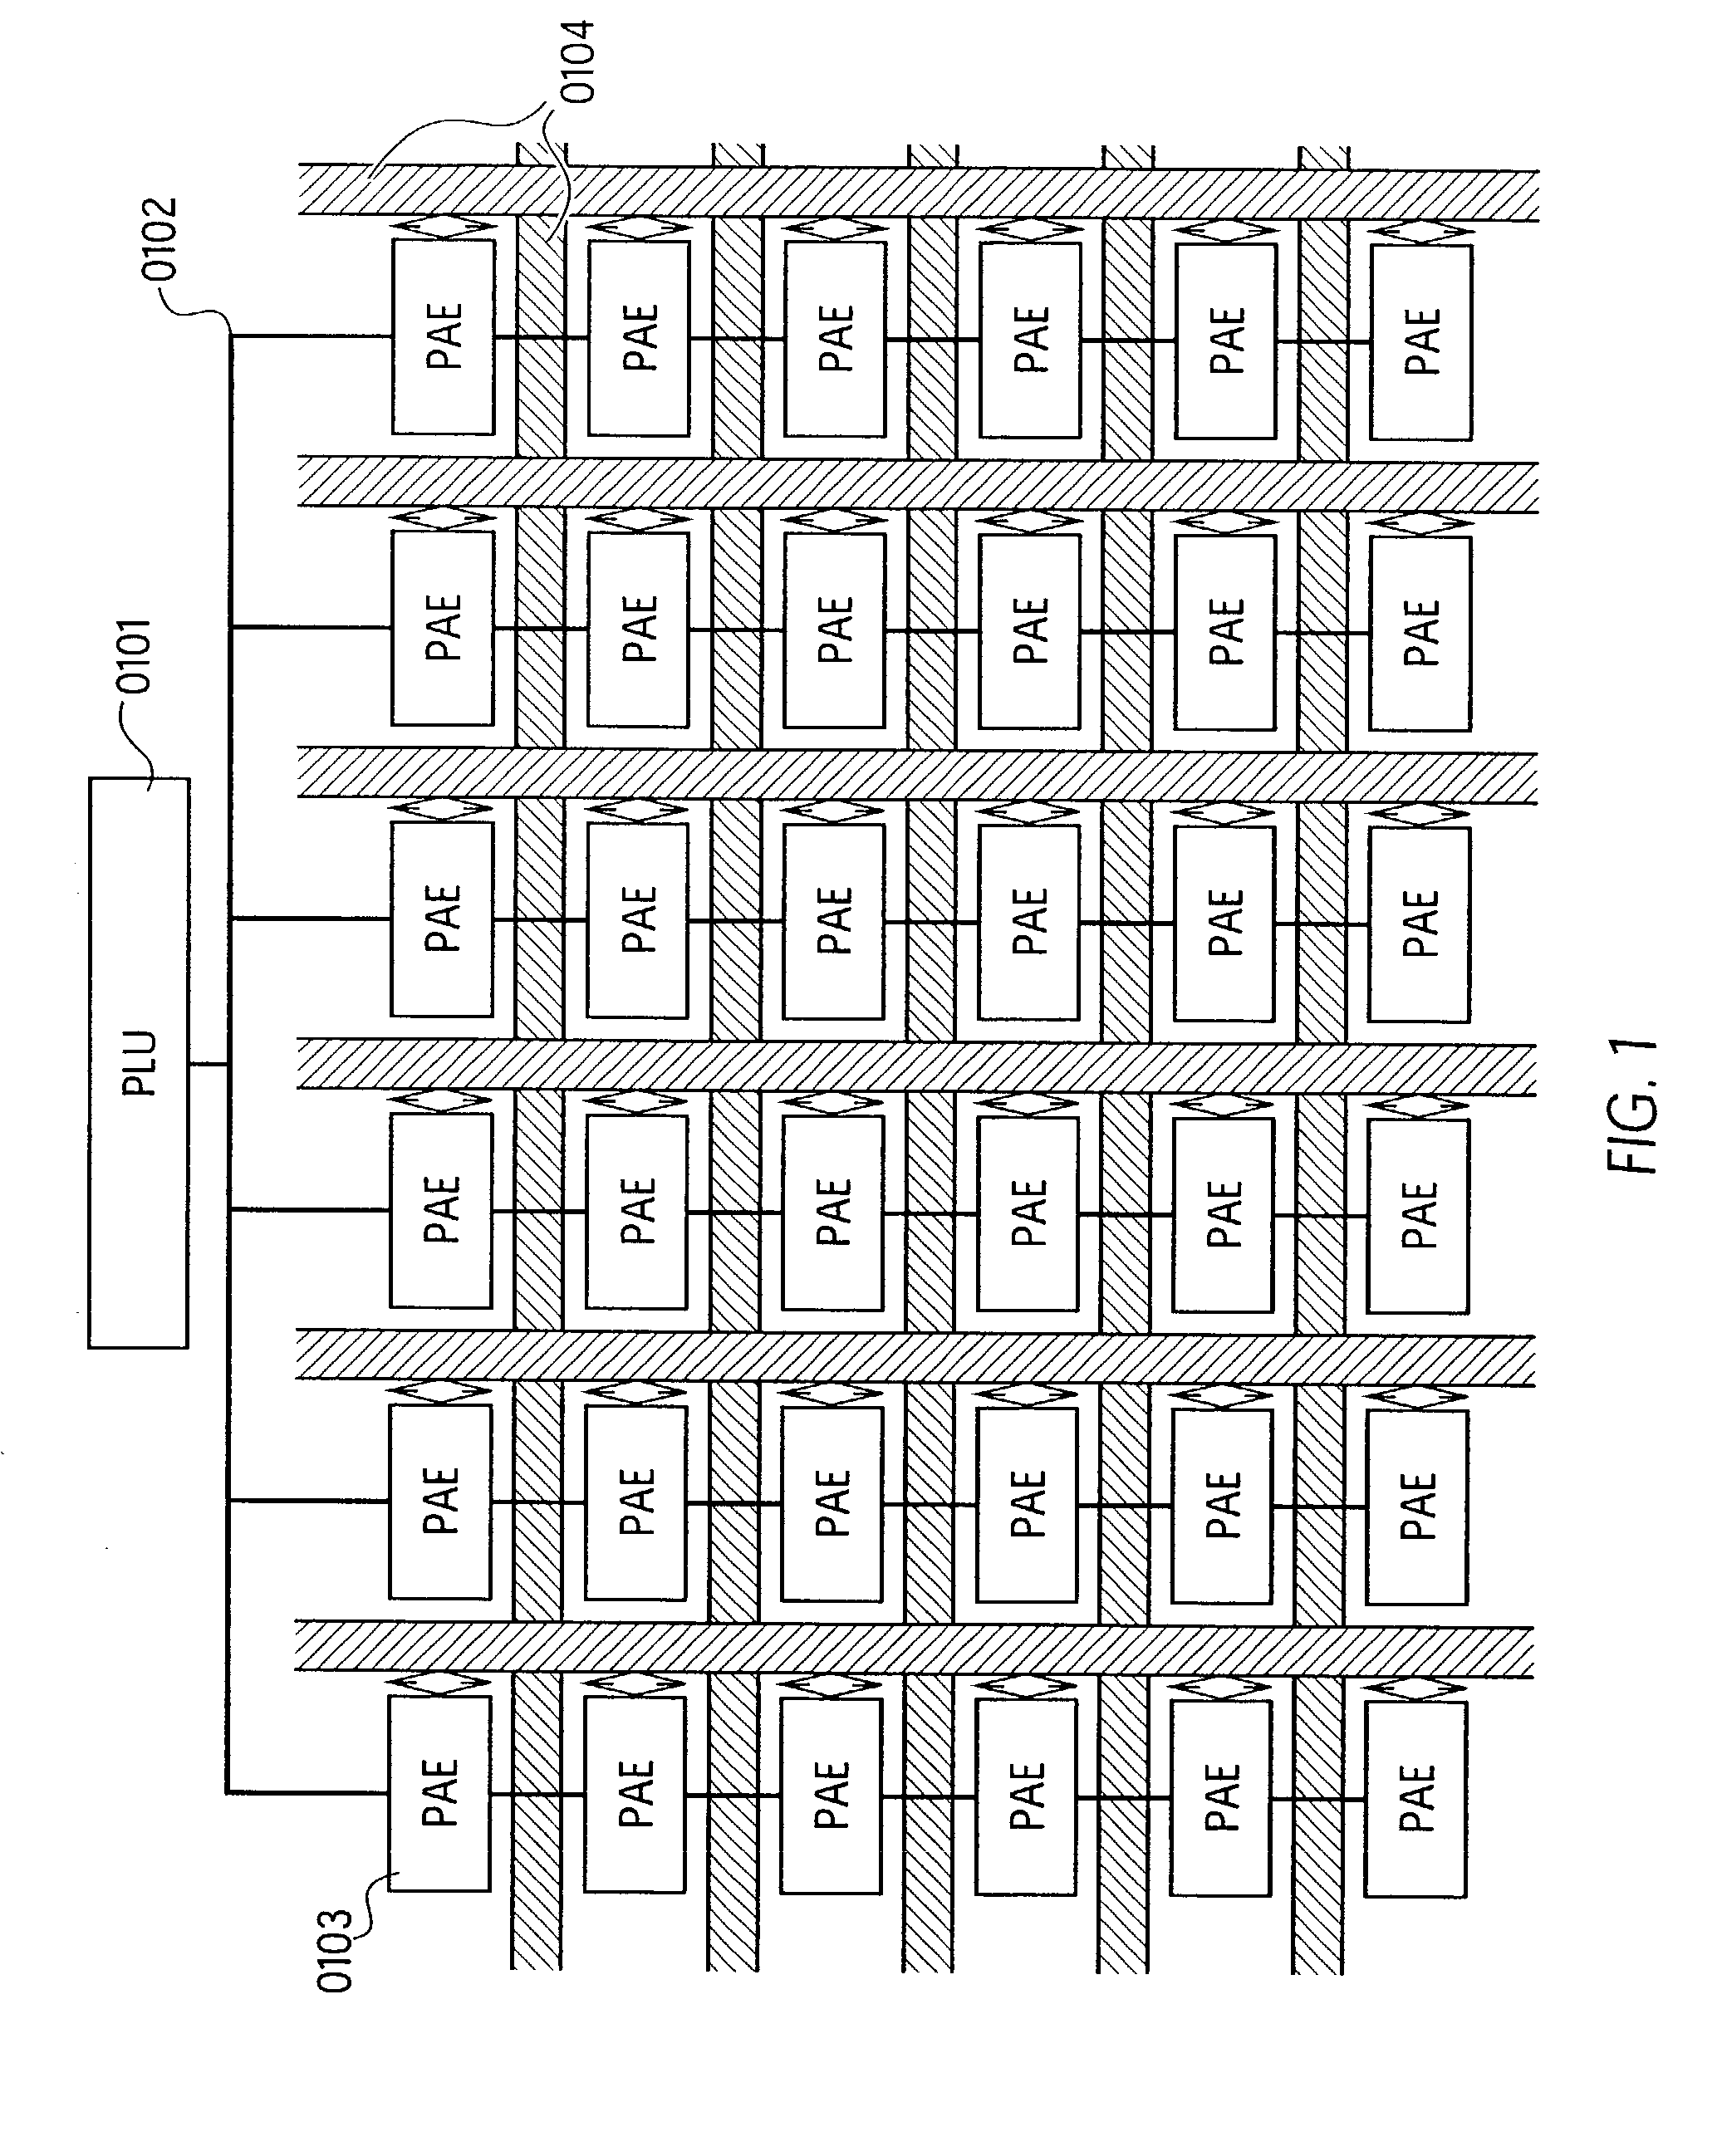 Unit for processing numeric and logic operations for use in central processing units (CPUS), multiprocessor systems, data-flow processors (DSPS), systolic processors and field programmable gate arrays (FPGAS)